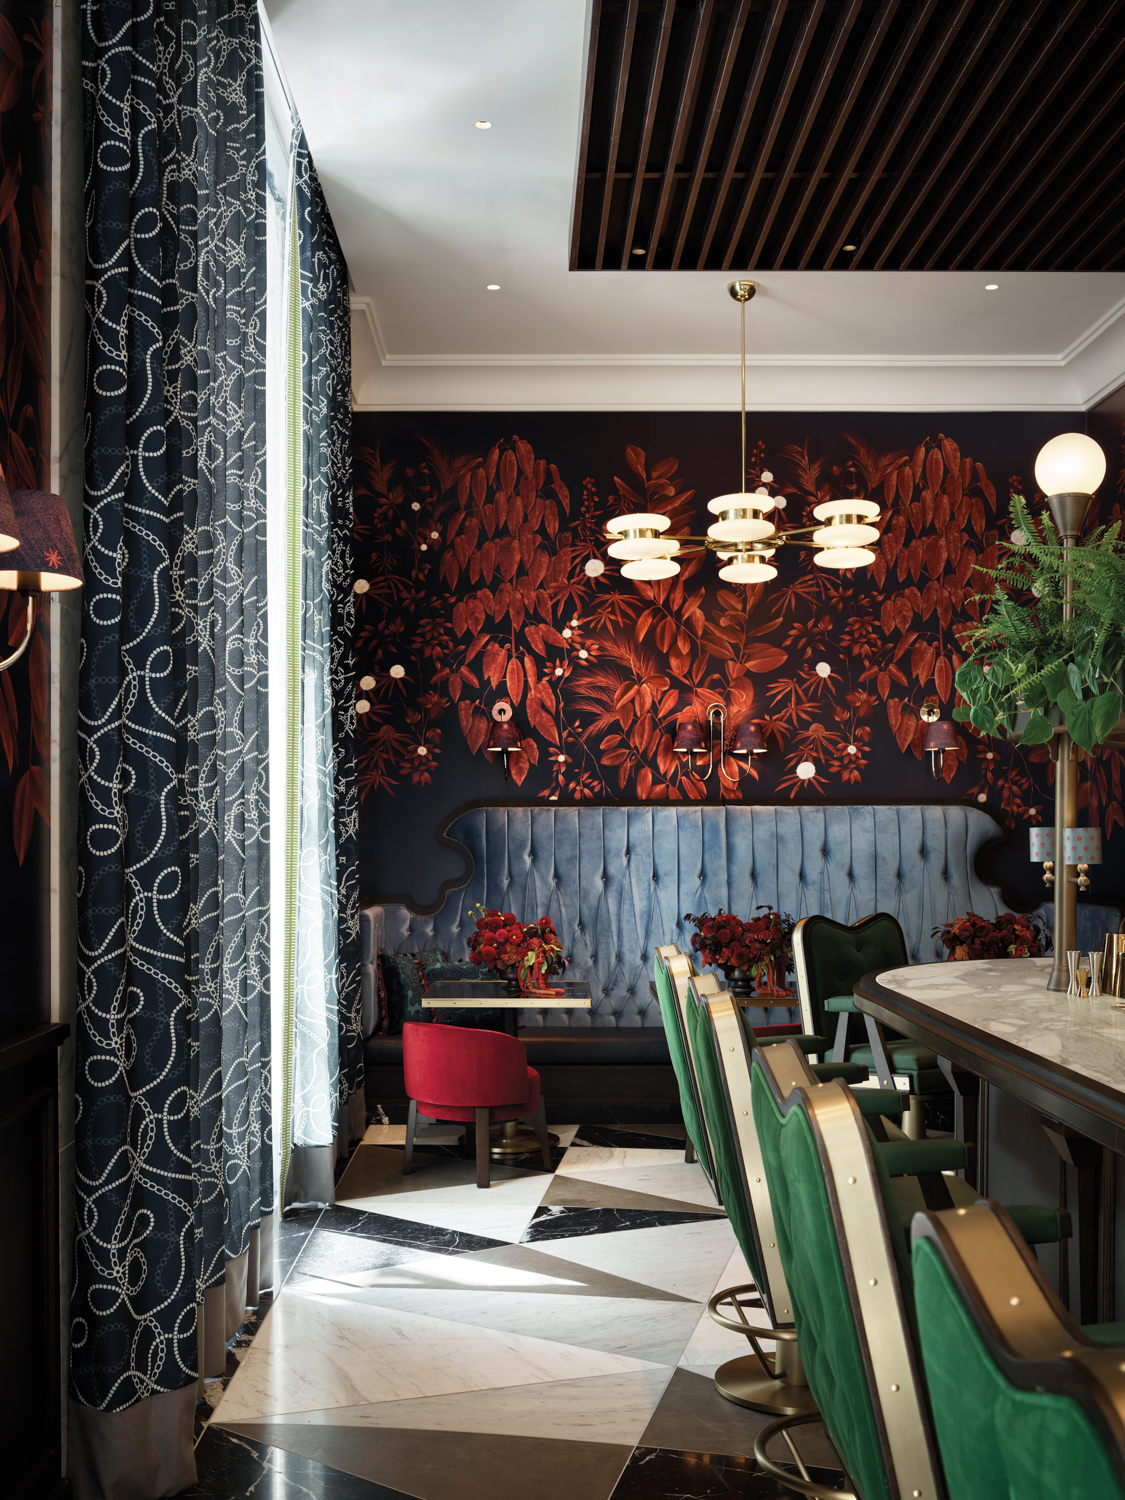 Check Out The Chic Restaurant Inside A Century-Old SF Venue